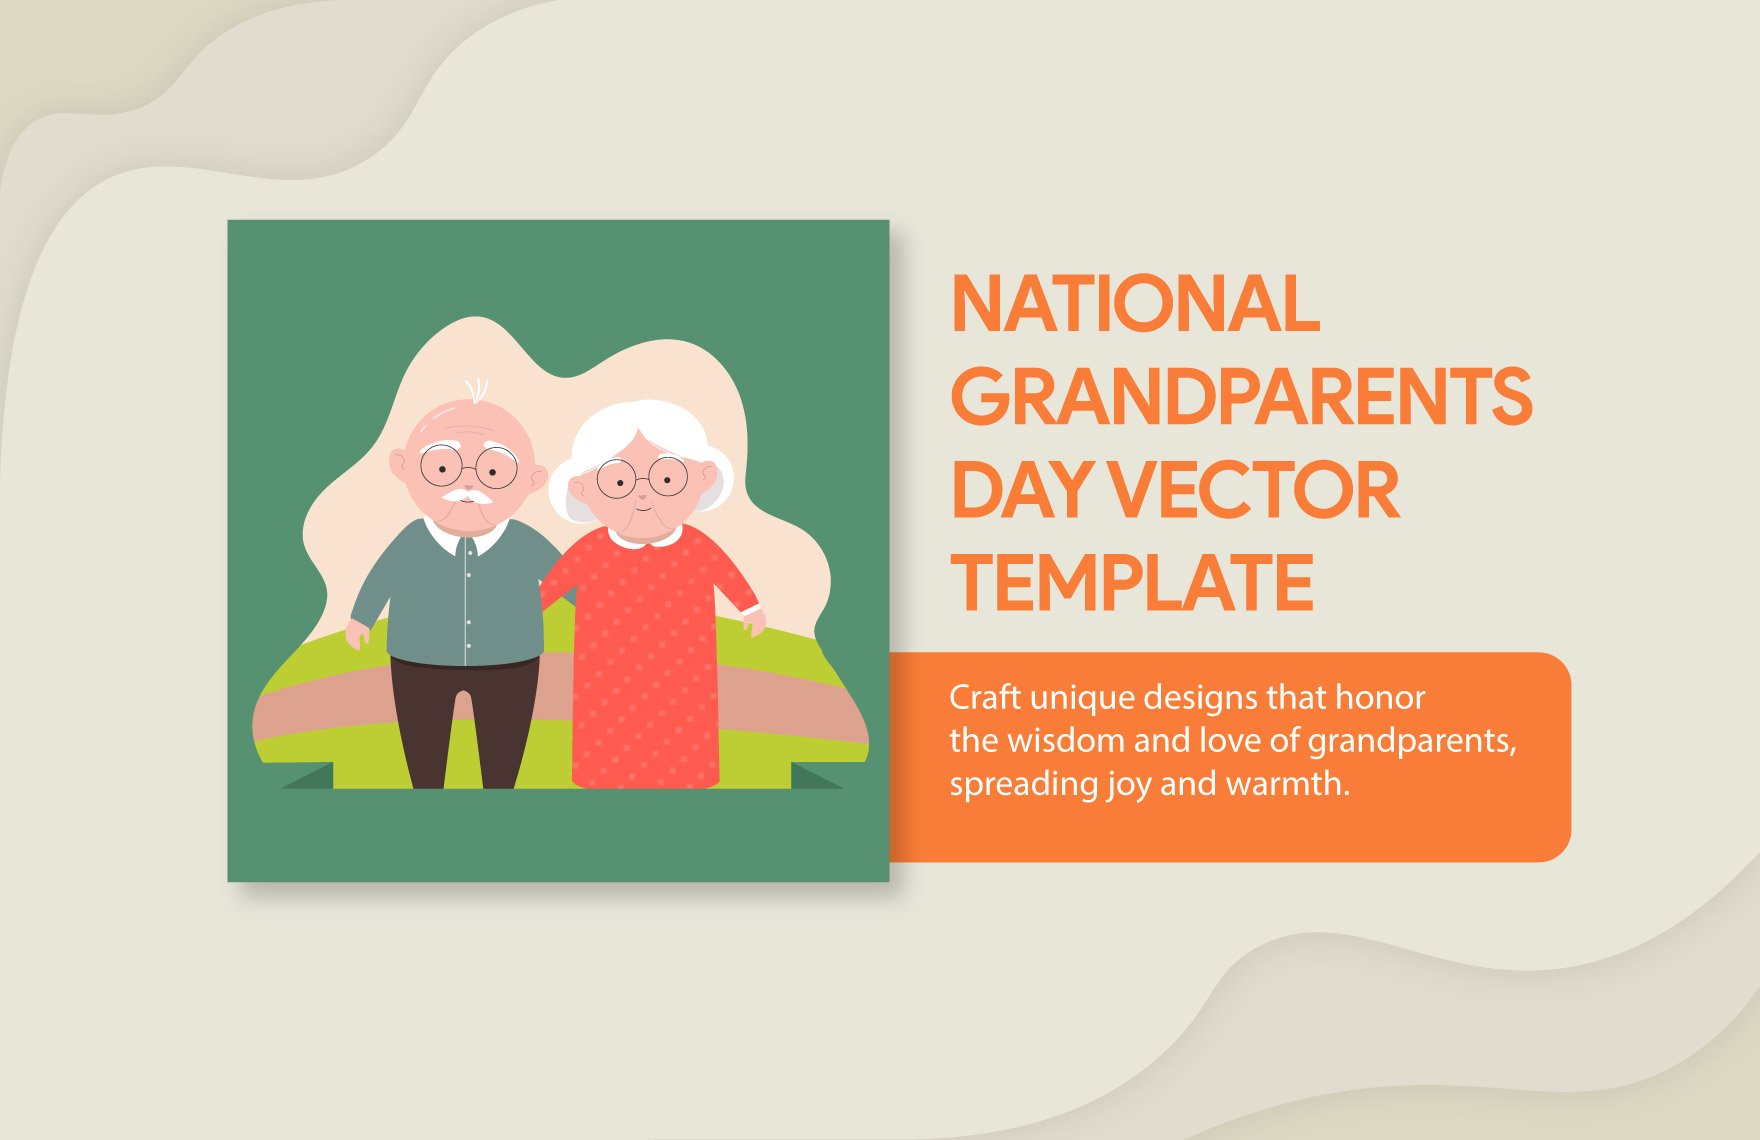 Free National Grandparents Day Vector in Illustrator, PSD, PNG